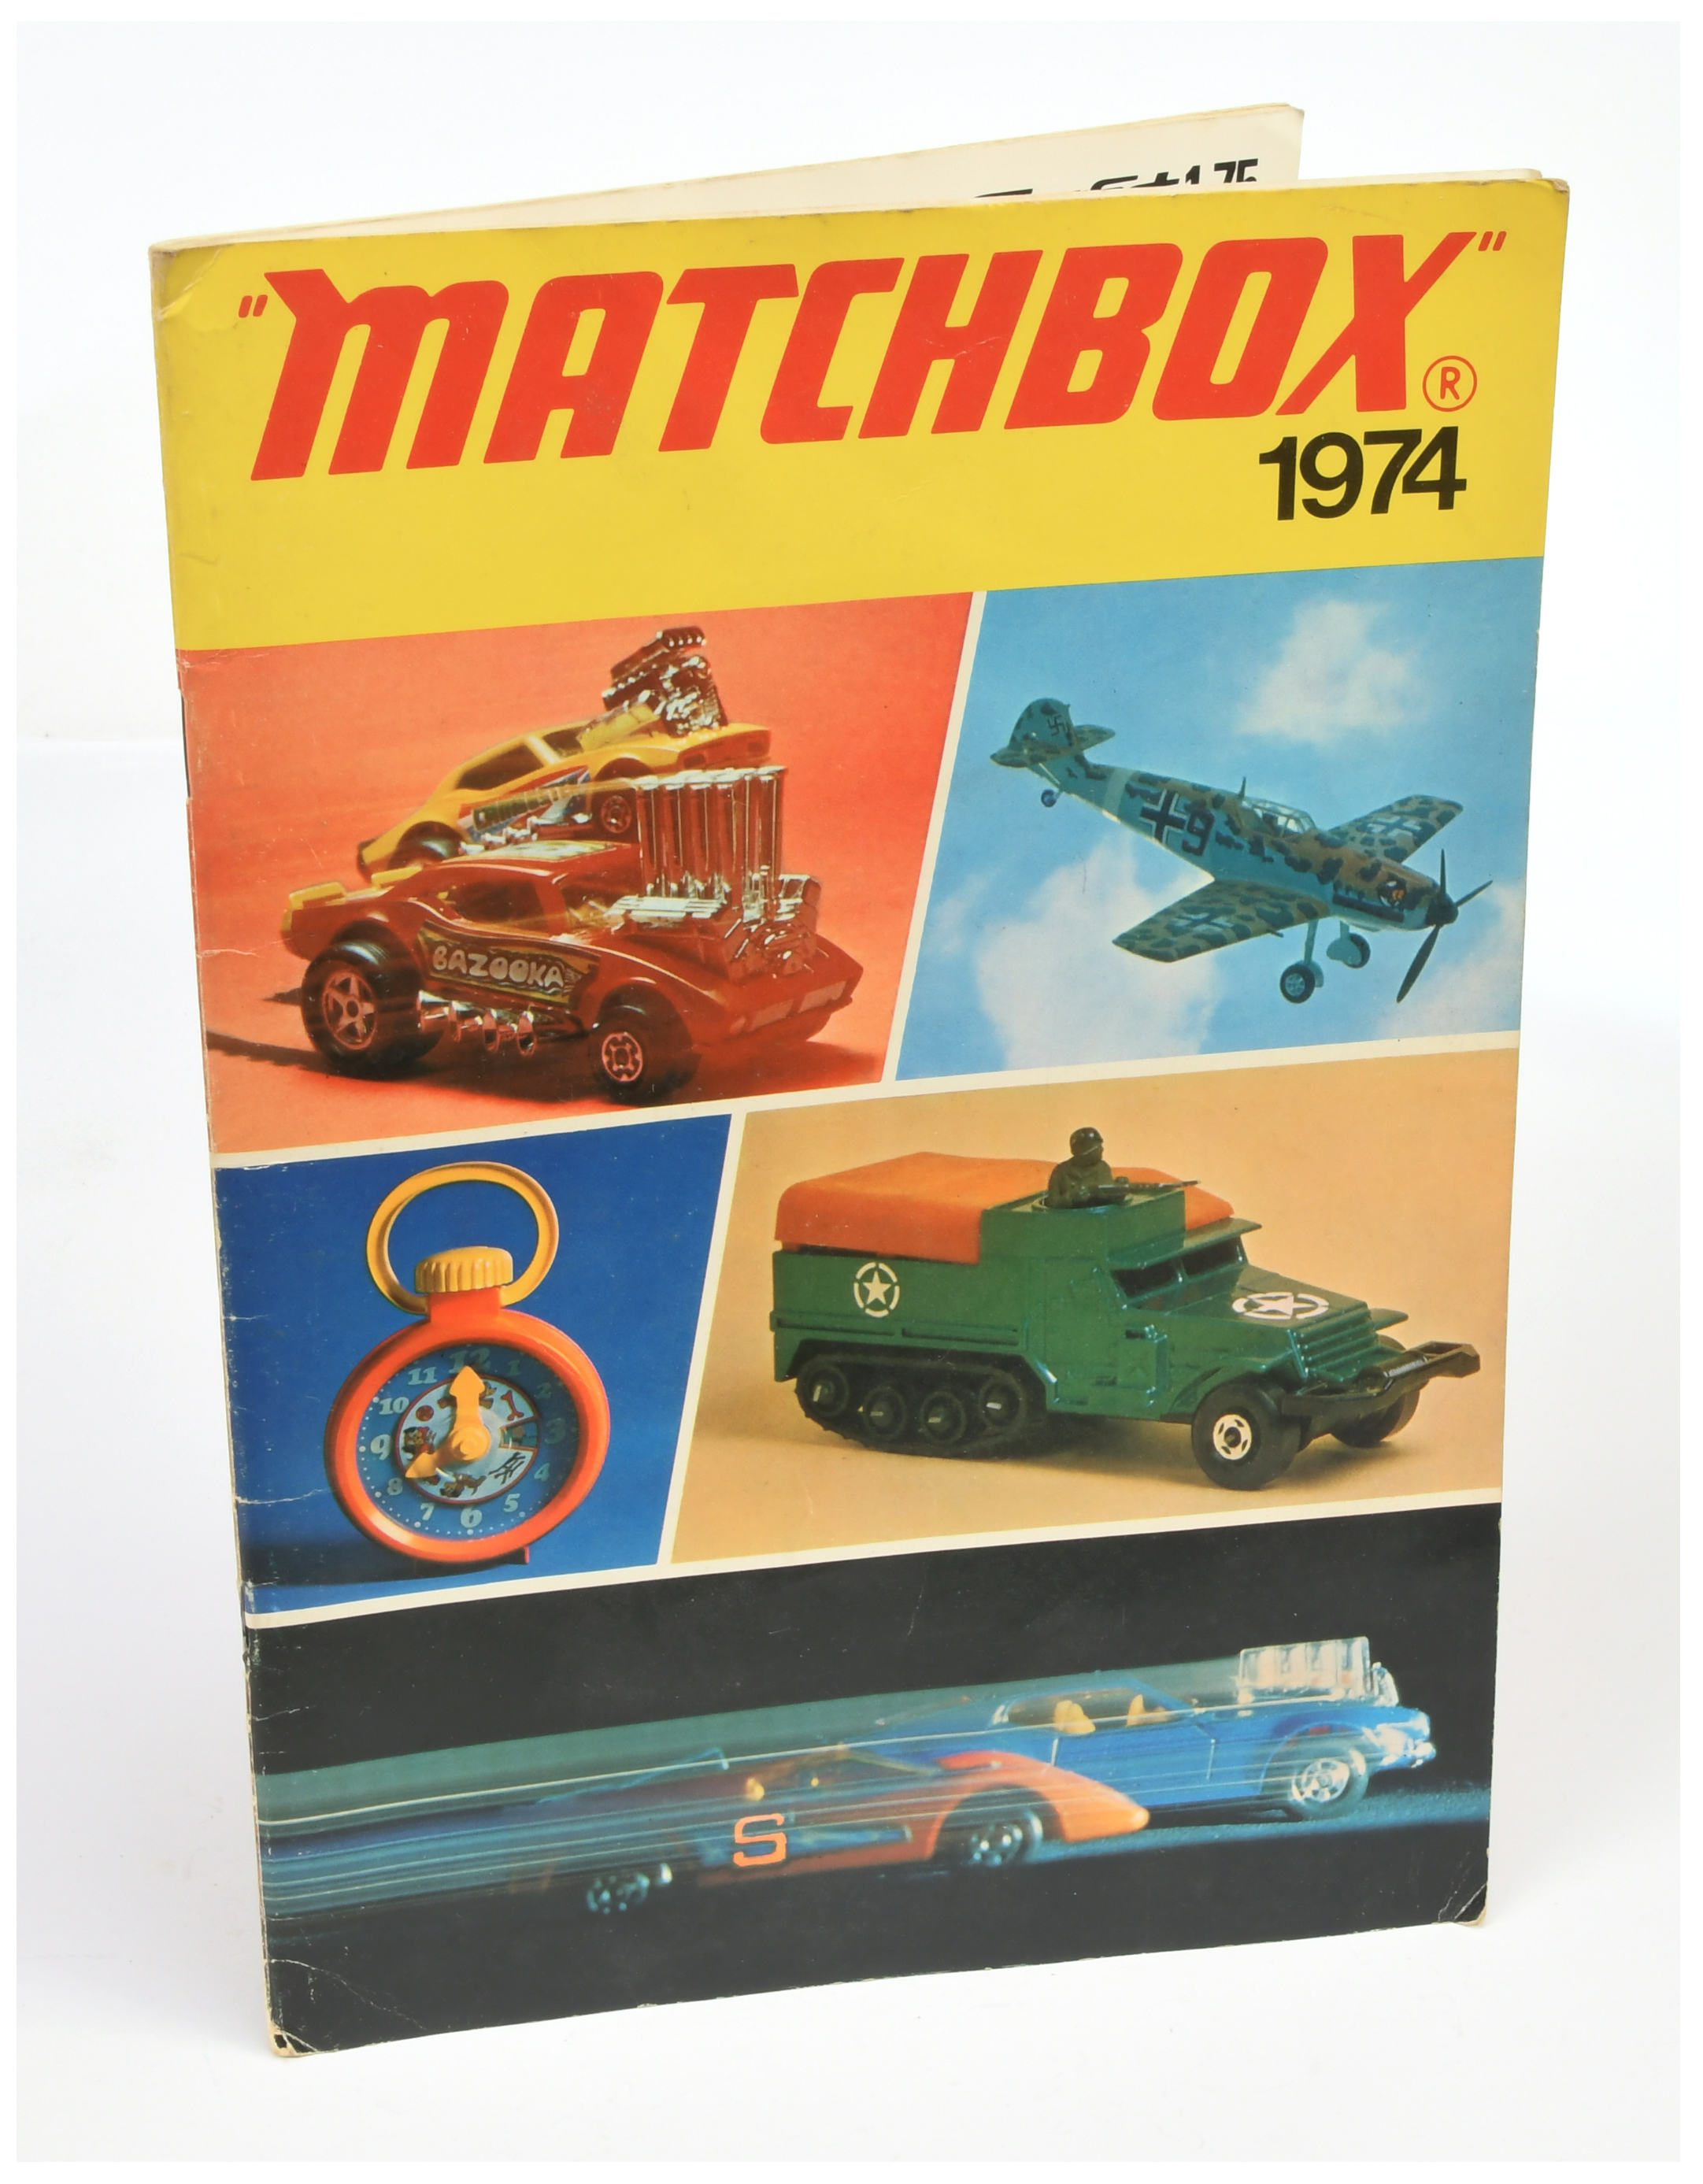 Matchbox 1974 Trade Catalogue - To Include Superfast, Superkings, Models Of Yesteryear, Skybuster...